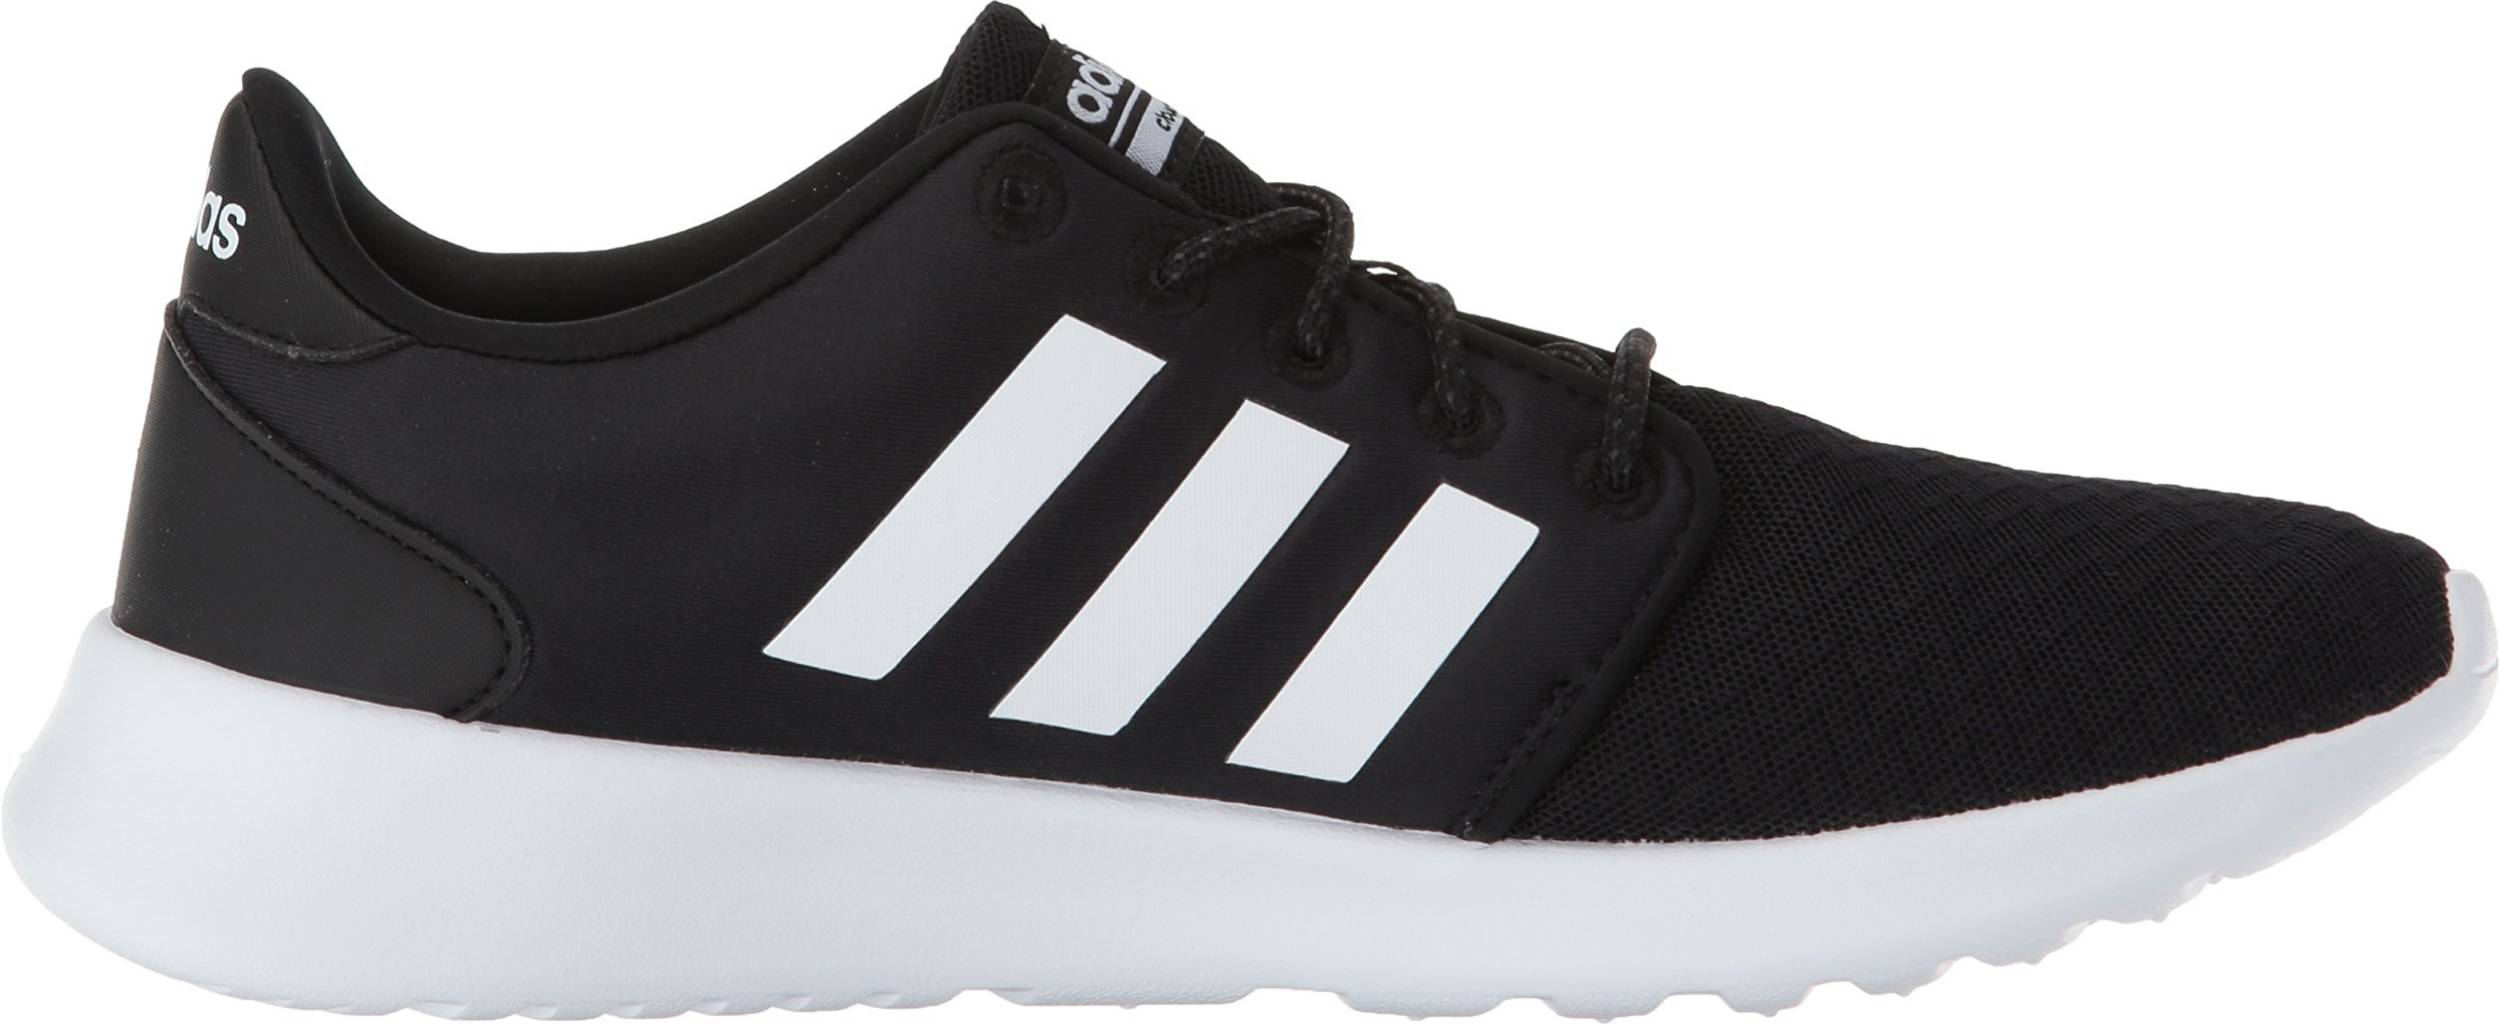 Adidas Cloudfoam QT Racer sneakers in 10+ colors (only $35) | RunRepeat